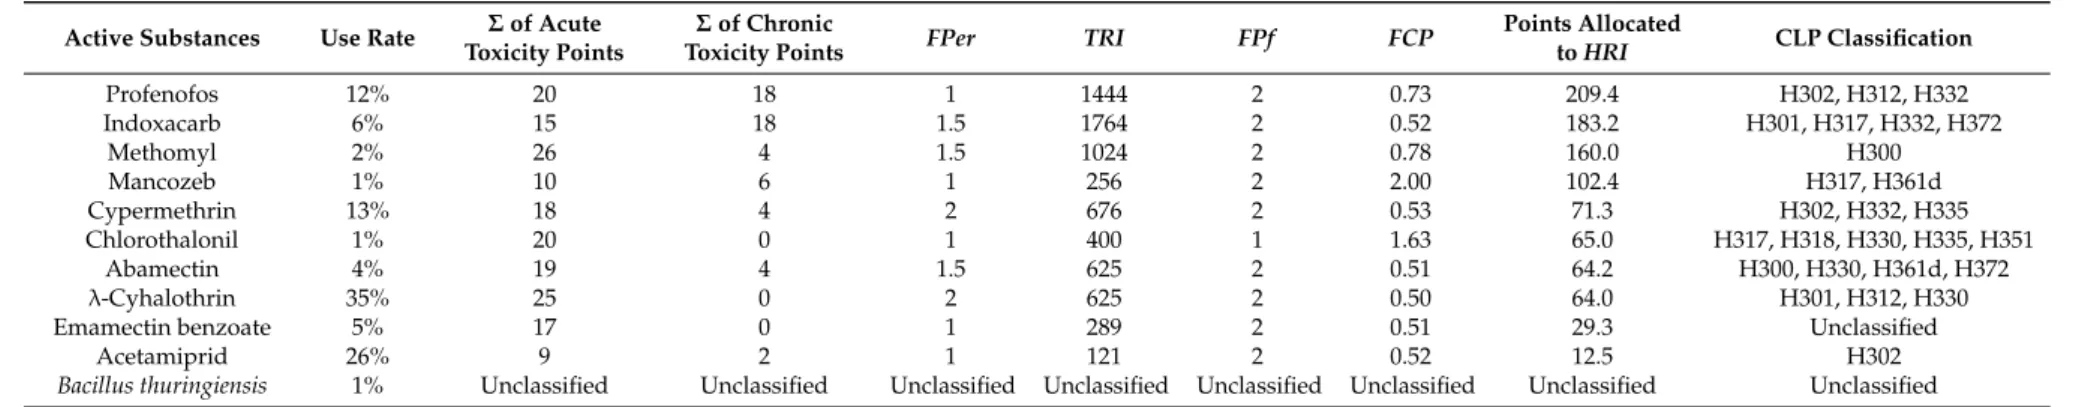 Table 3. Value of the parameters used in the calculation of the Health Risk Index (HRI) and the toxicity of the active substances used for tomato protection in Kouka and Toussiana (Burkina Faso).